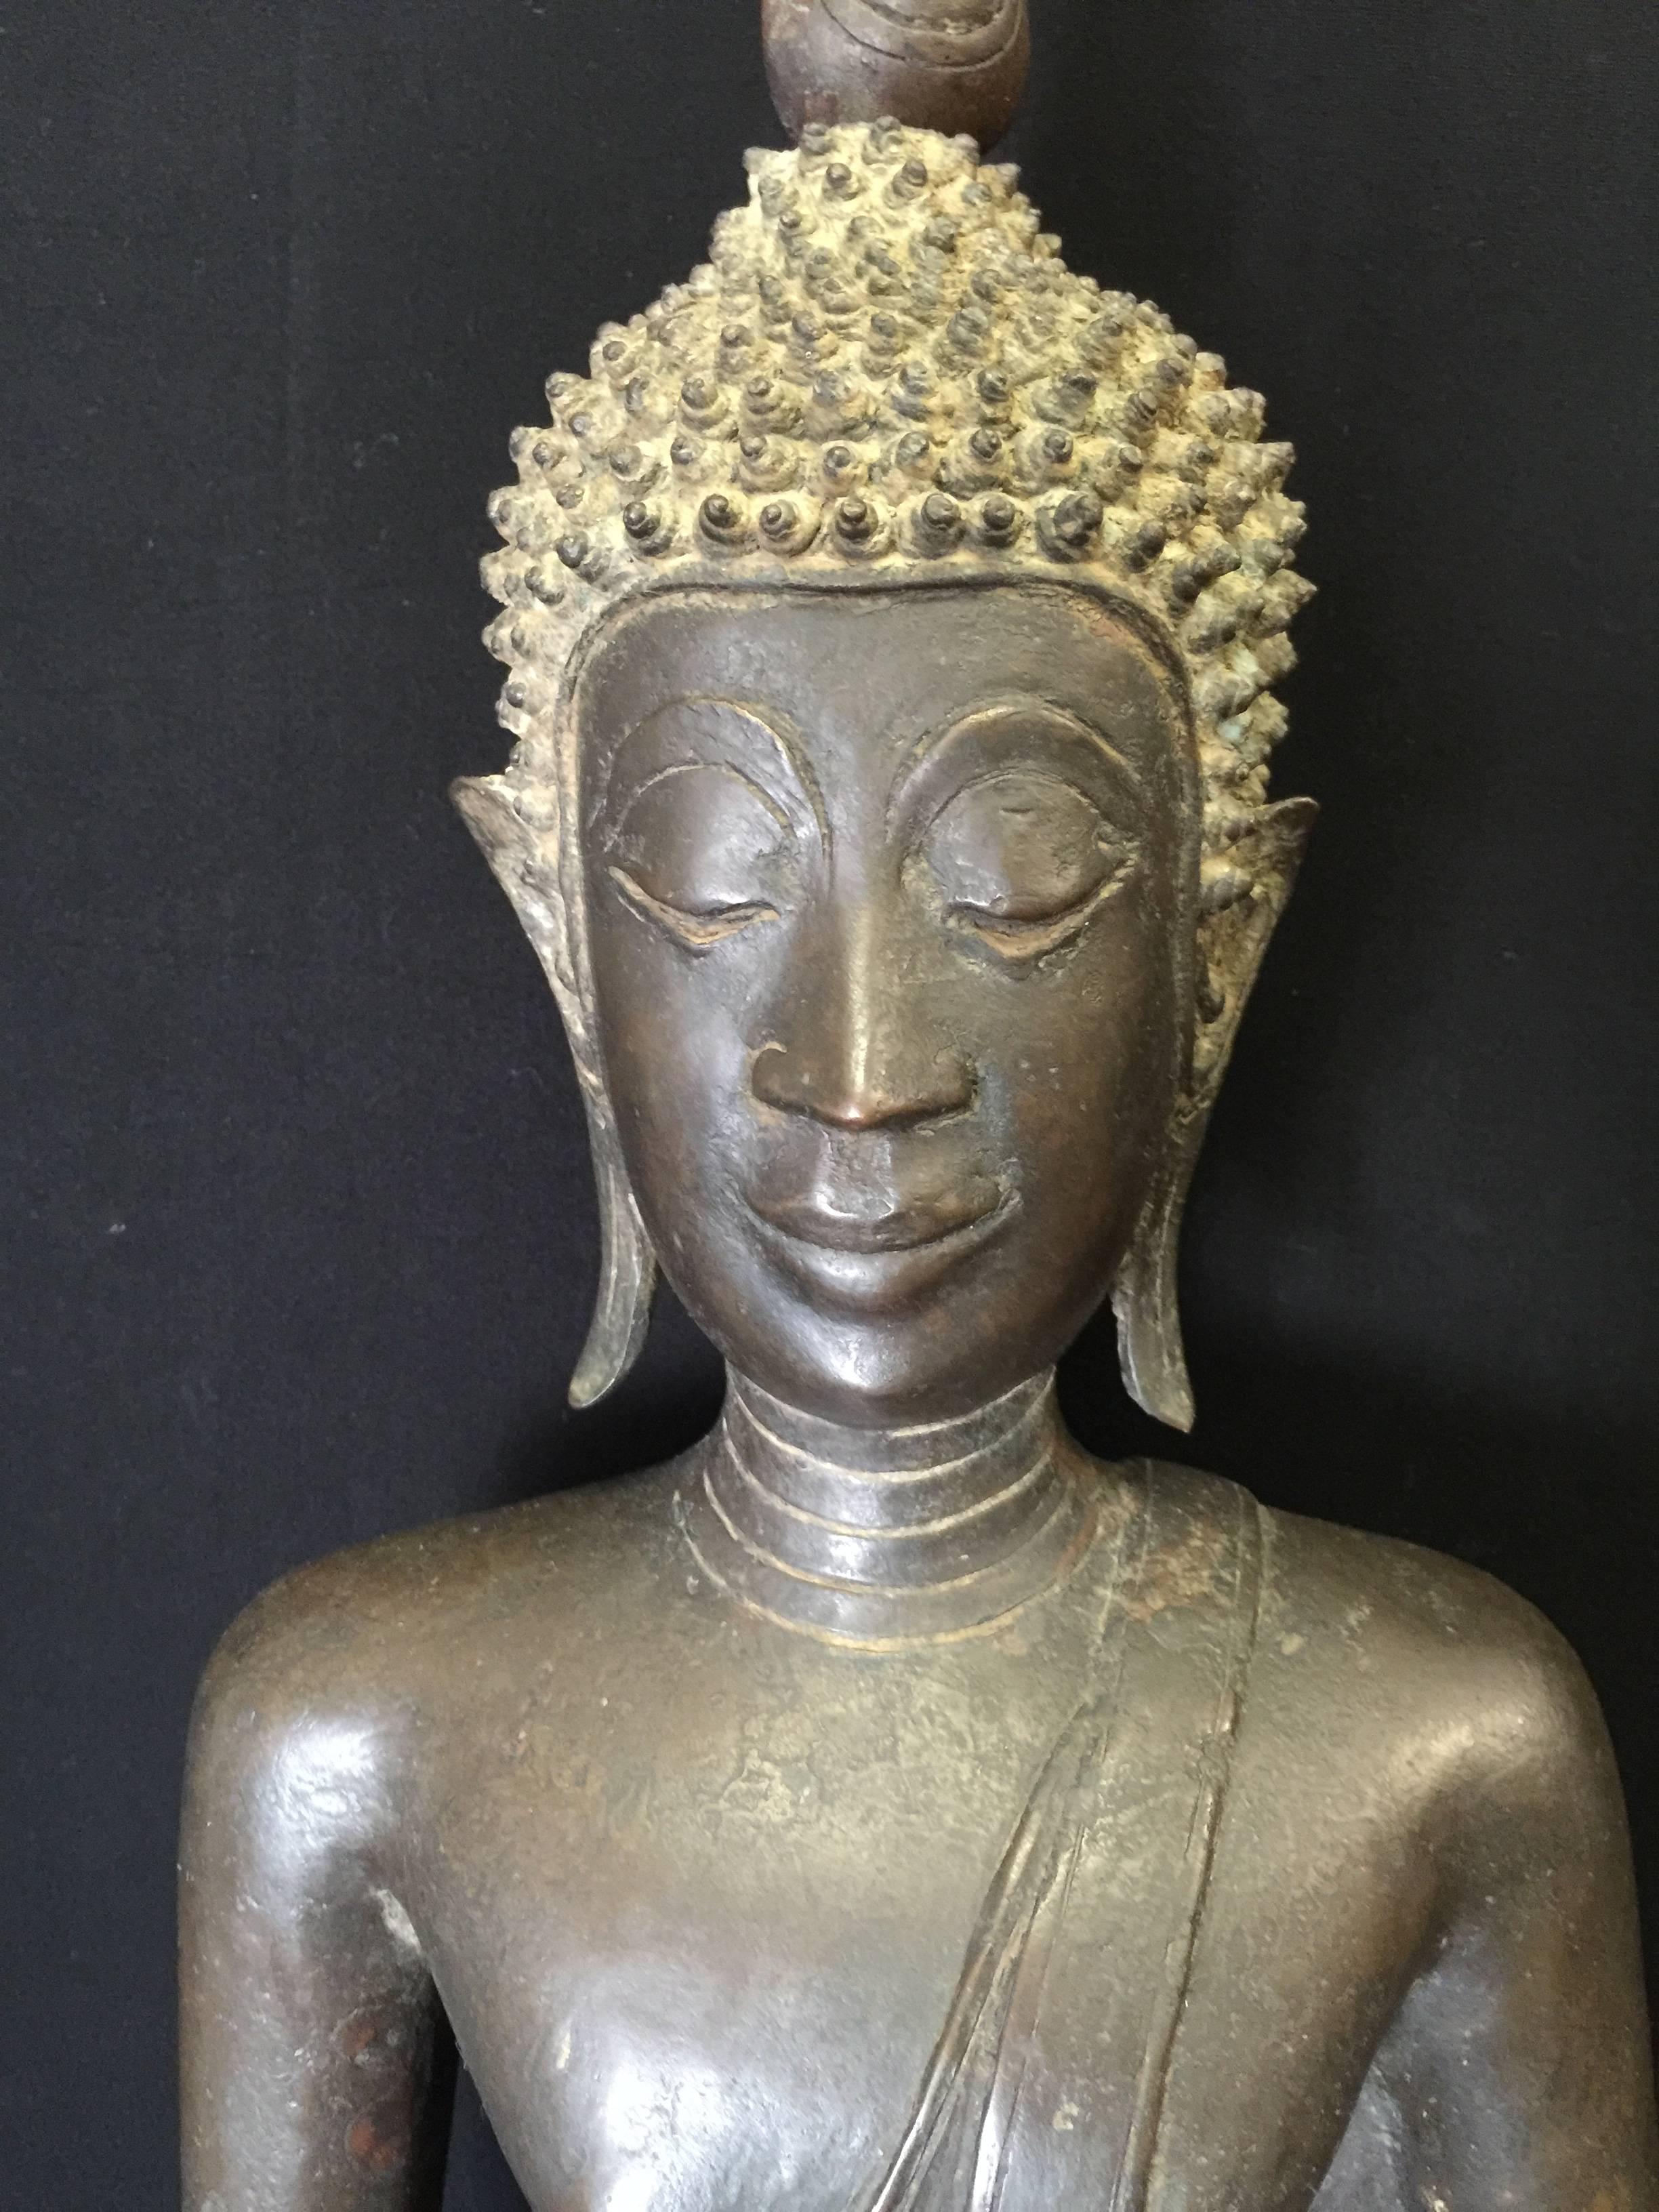 Large and beautiful sitting bronze Buddha from Laos. This rare Buddha is sitting on a large throne in a 